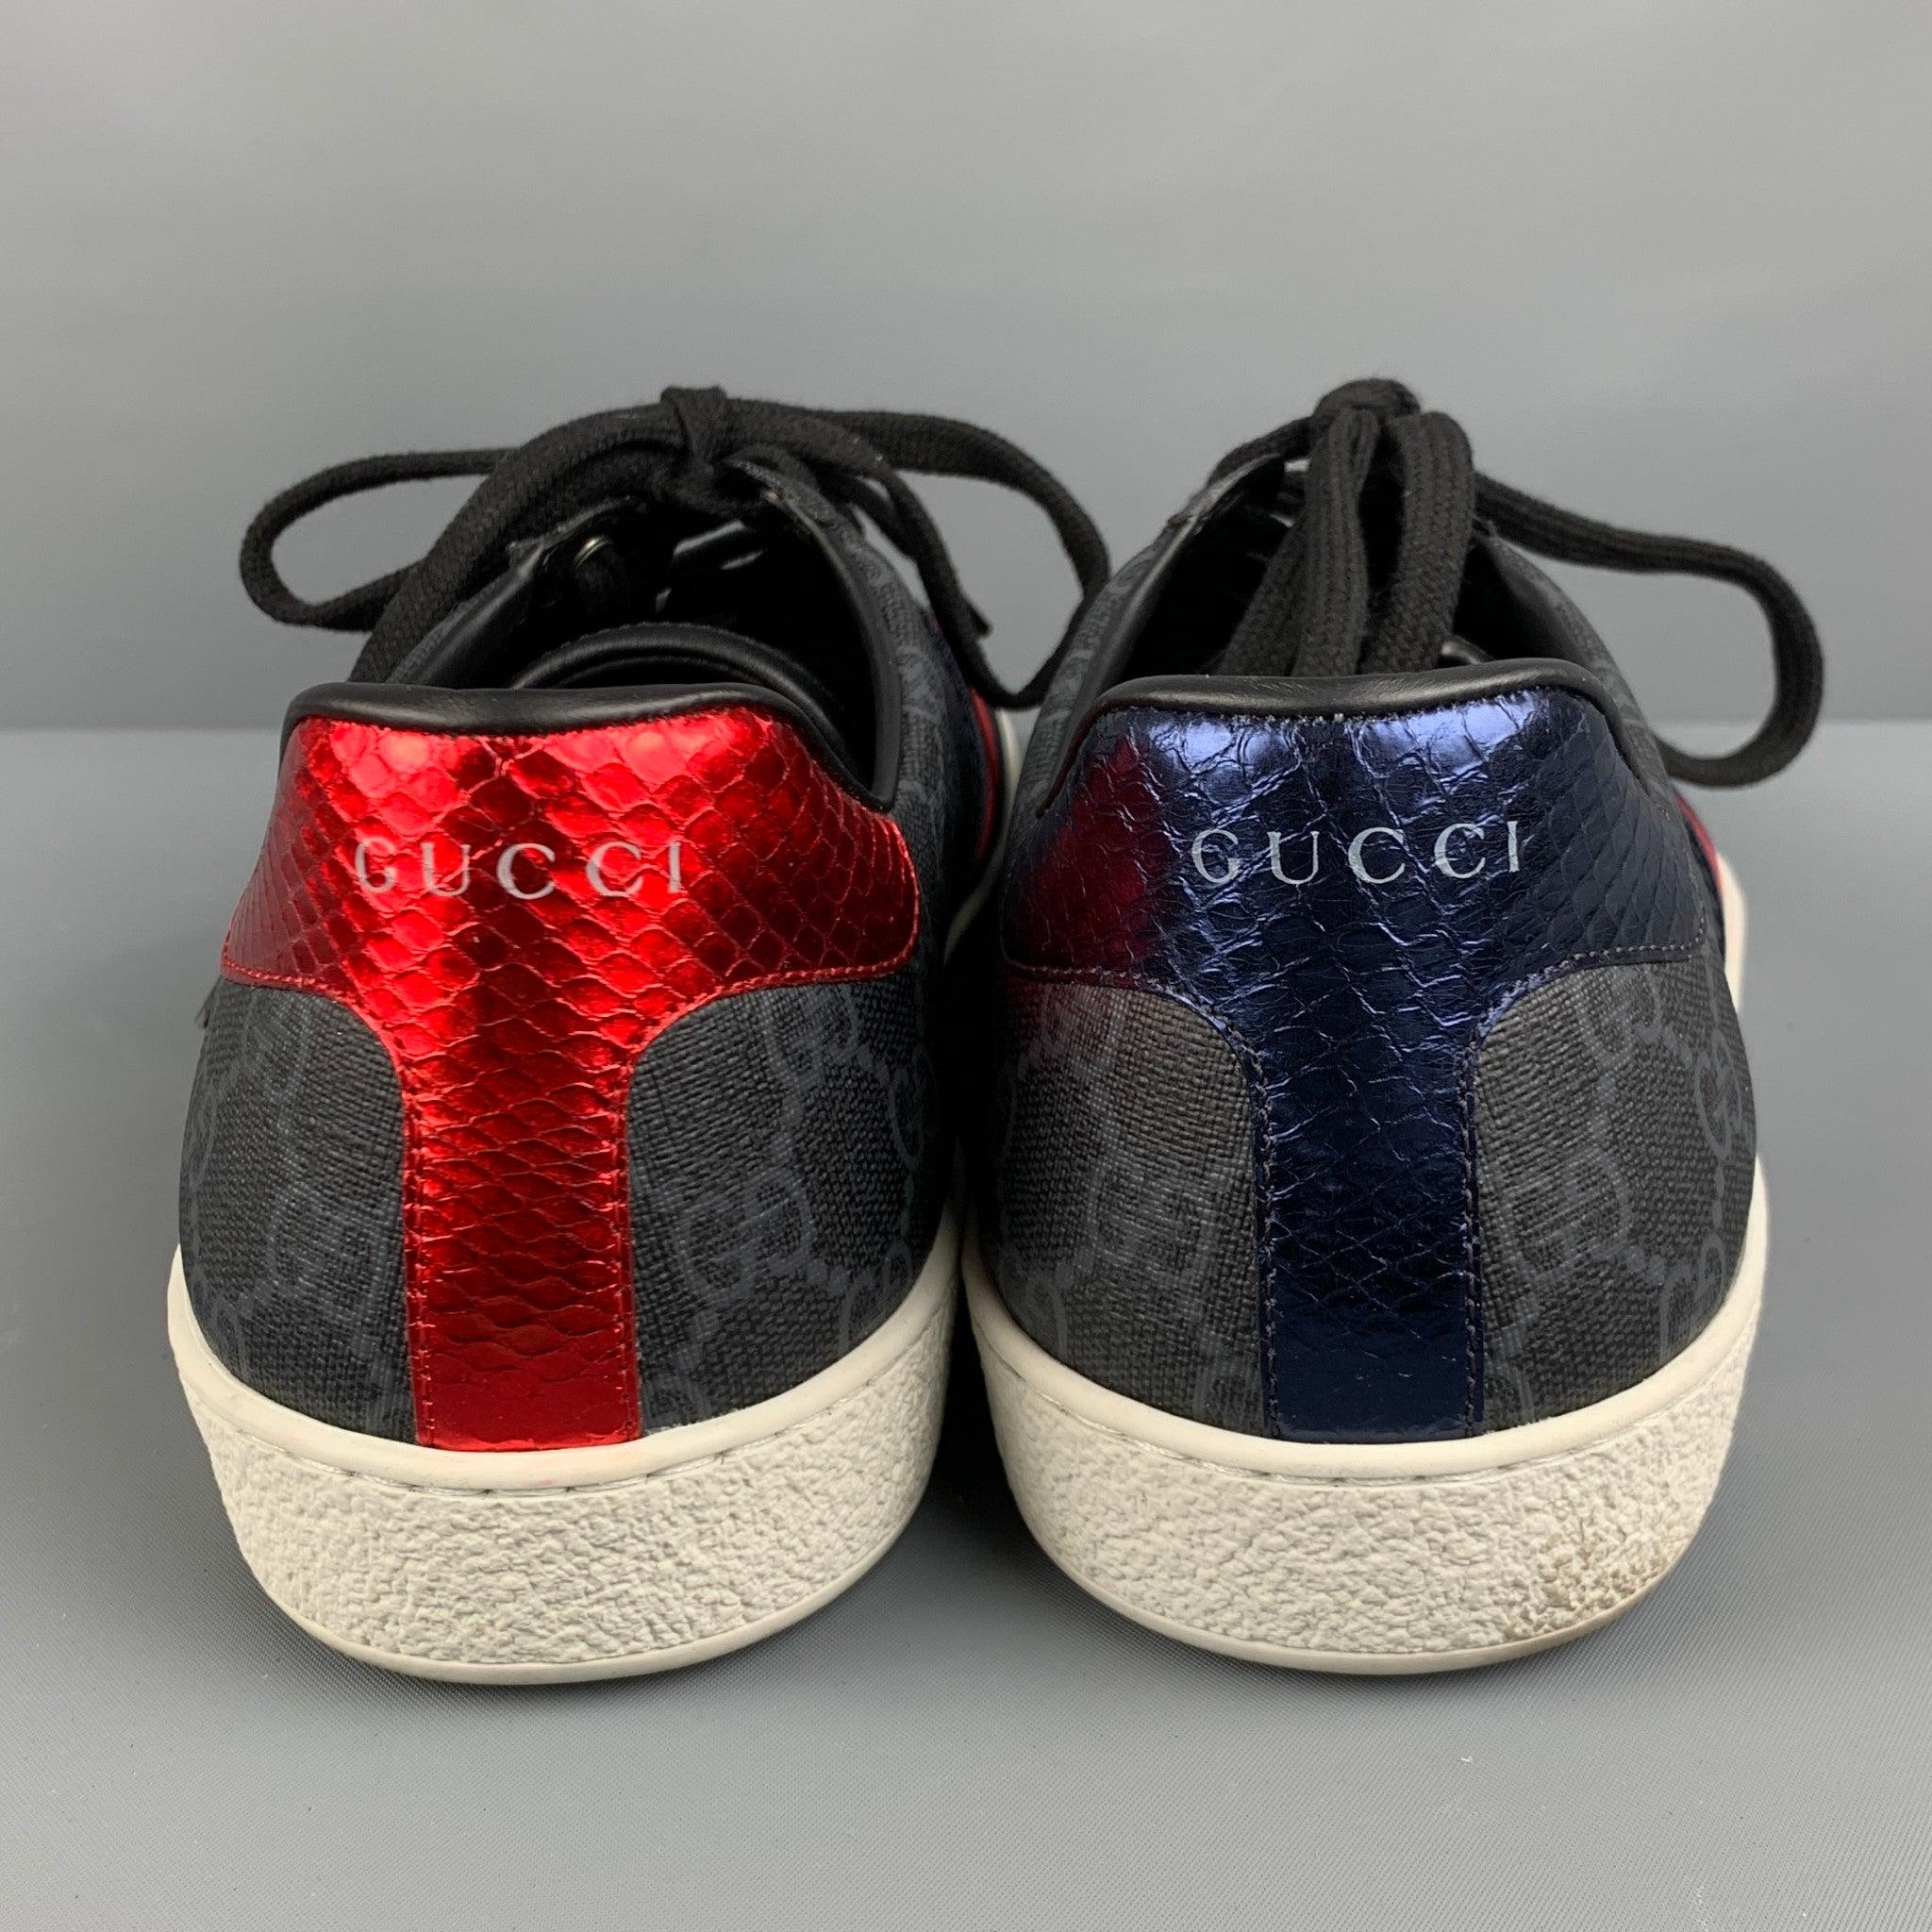 GUCCI Size 11 Black Grey Monogram Leather Lace Up Sneakers In Good Condition For Sale In San Francisco, CA